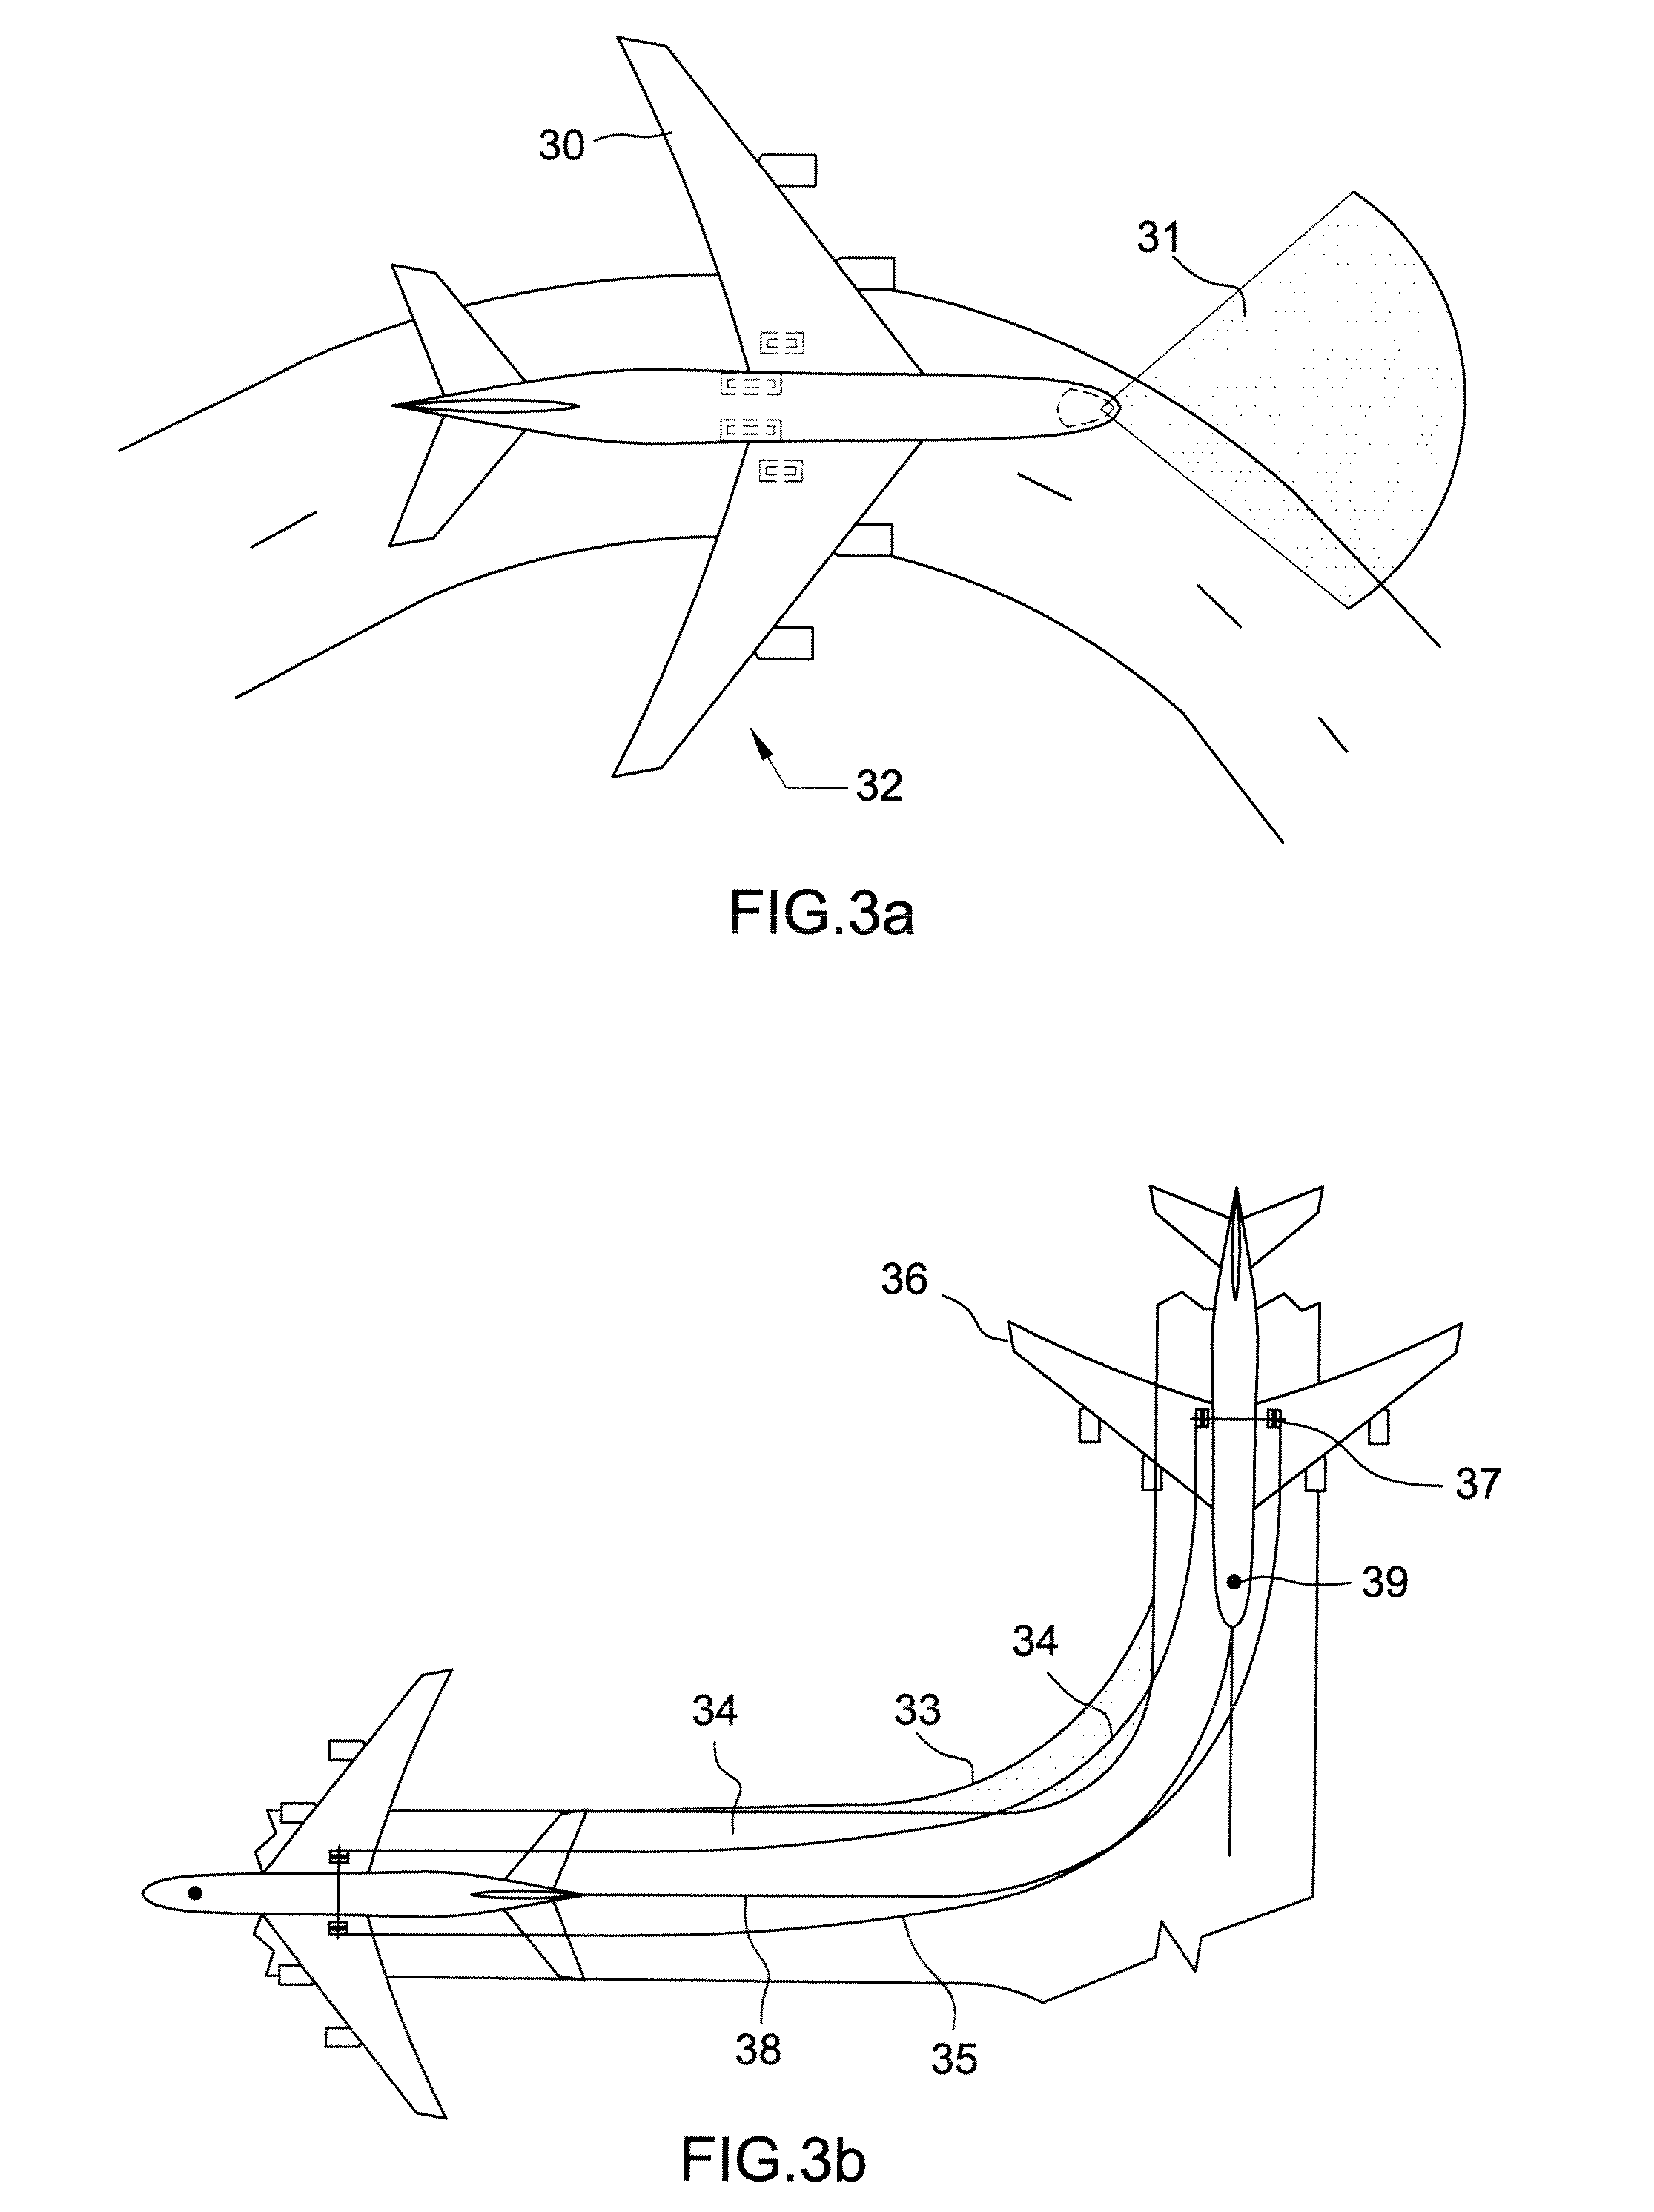 Guiding and taxiing assistance optoelectronic device for an aircraft having a dedicated symbology